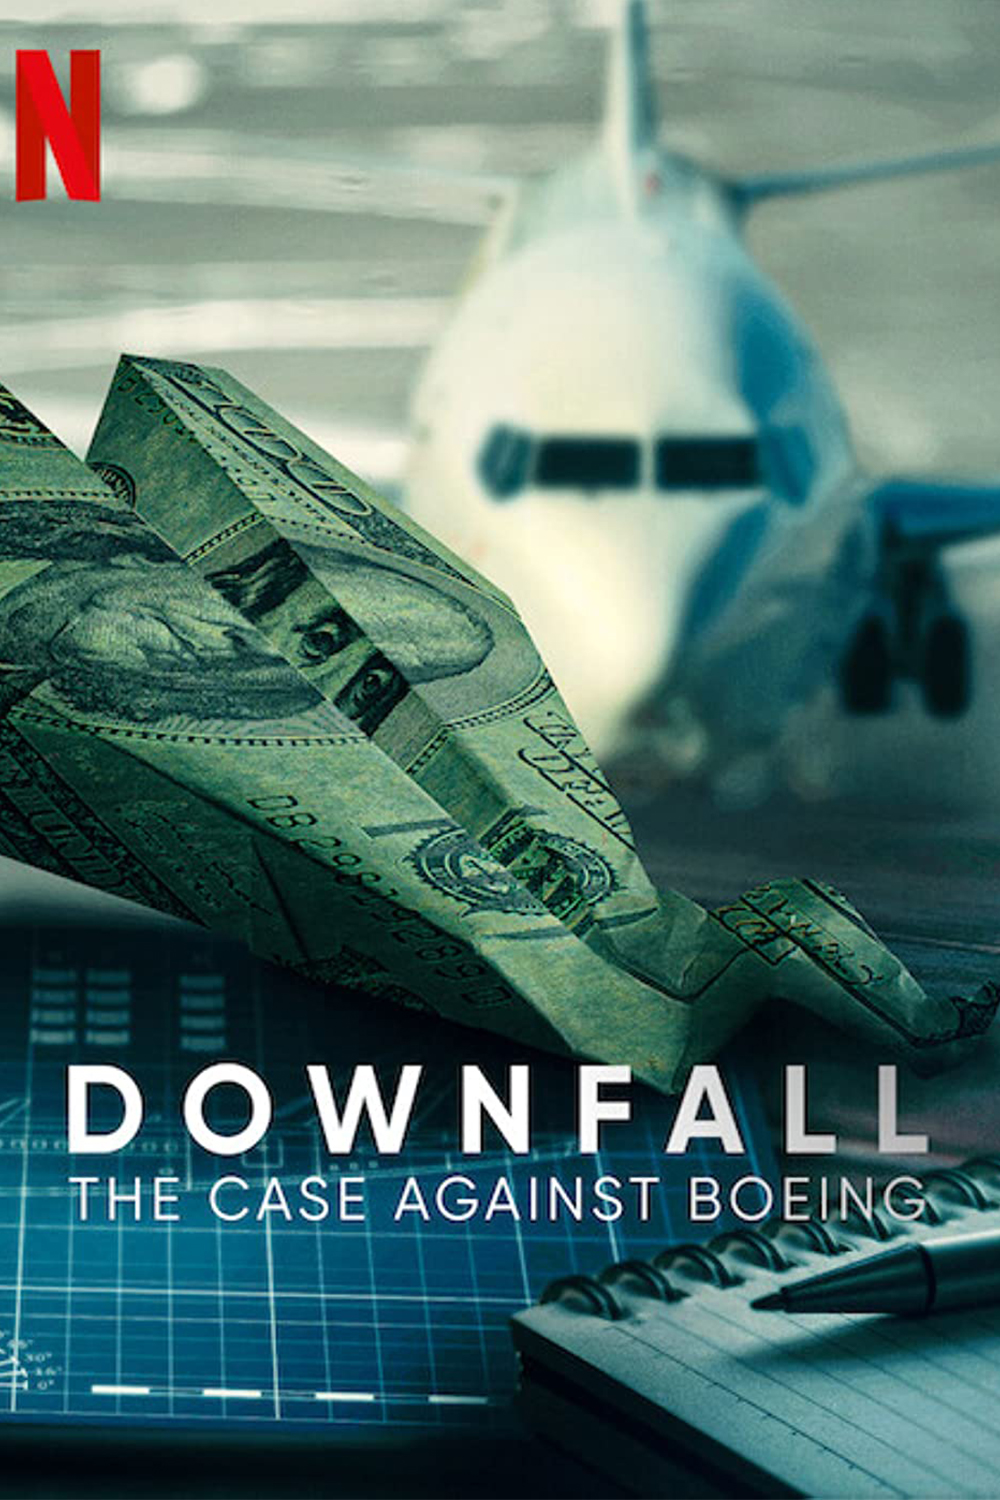 Downfall: The Case Against Boeing.